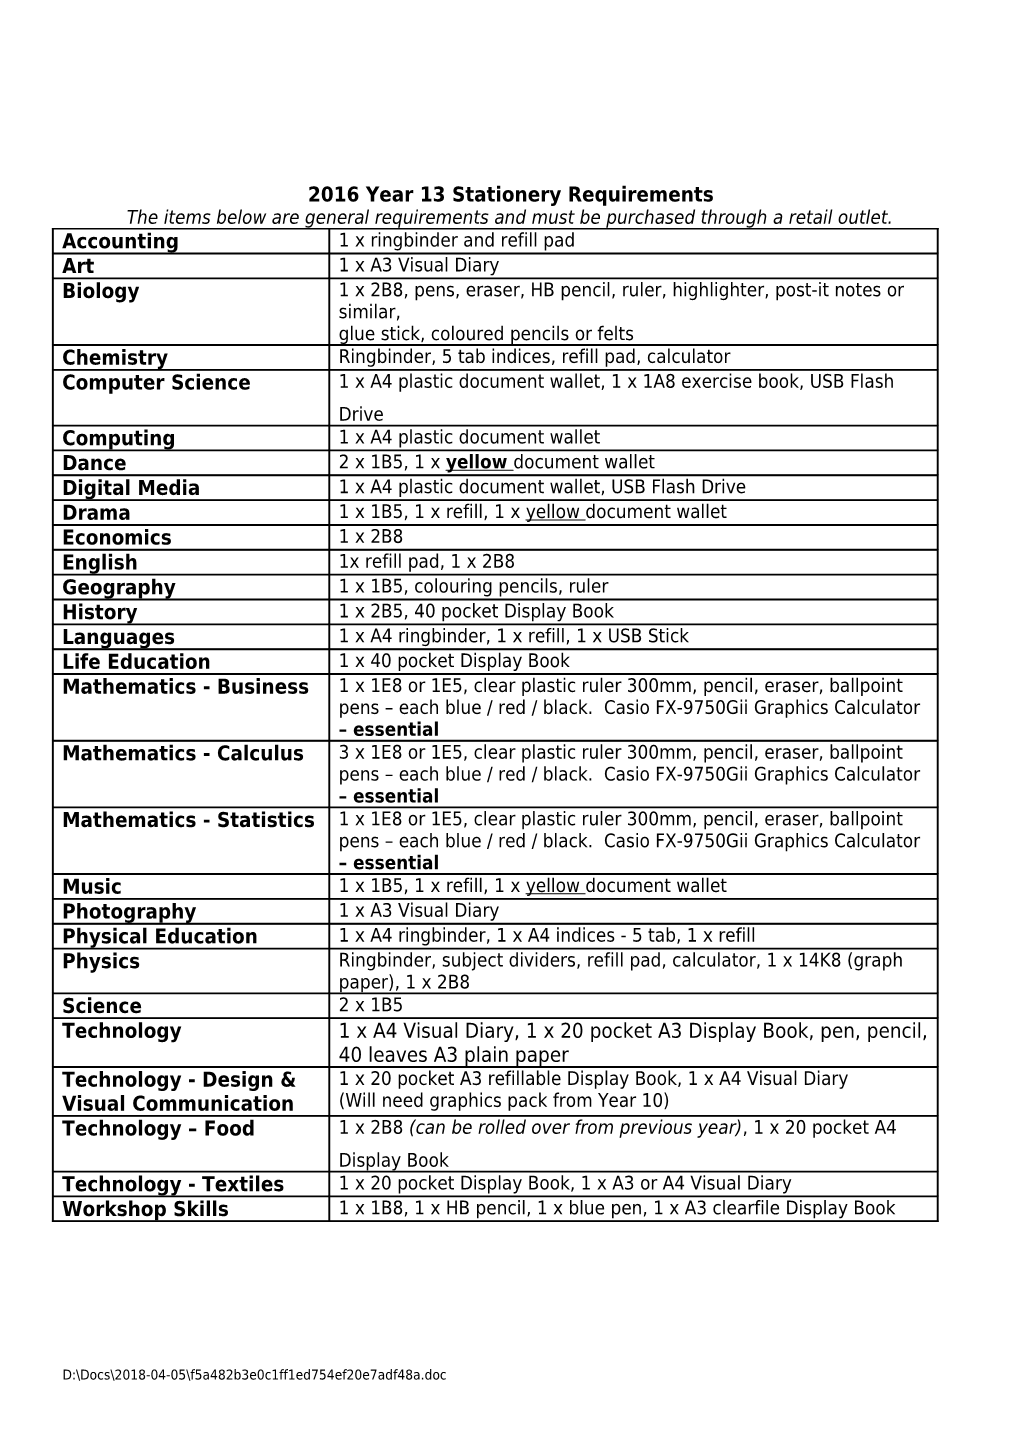 Year 13 Stationery Requirements 2006